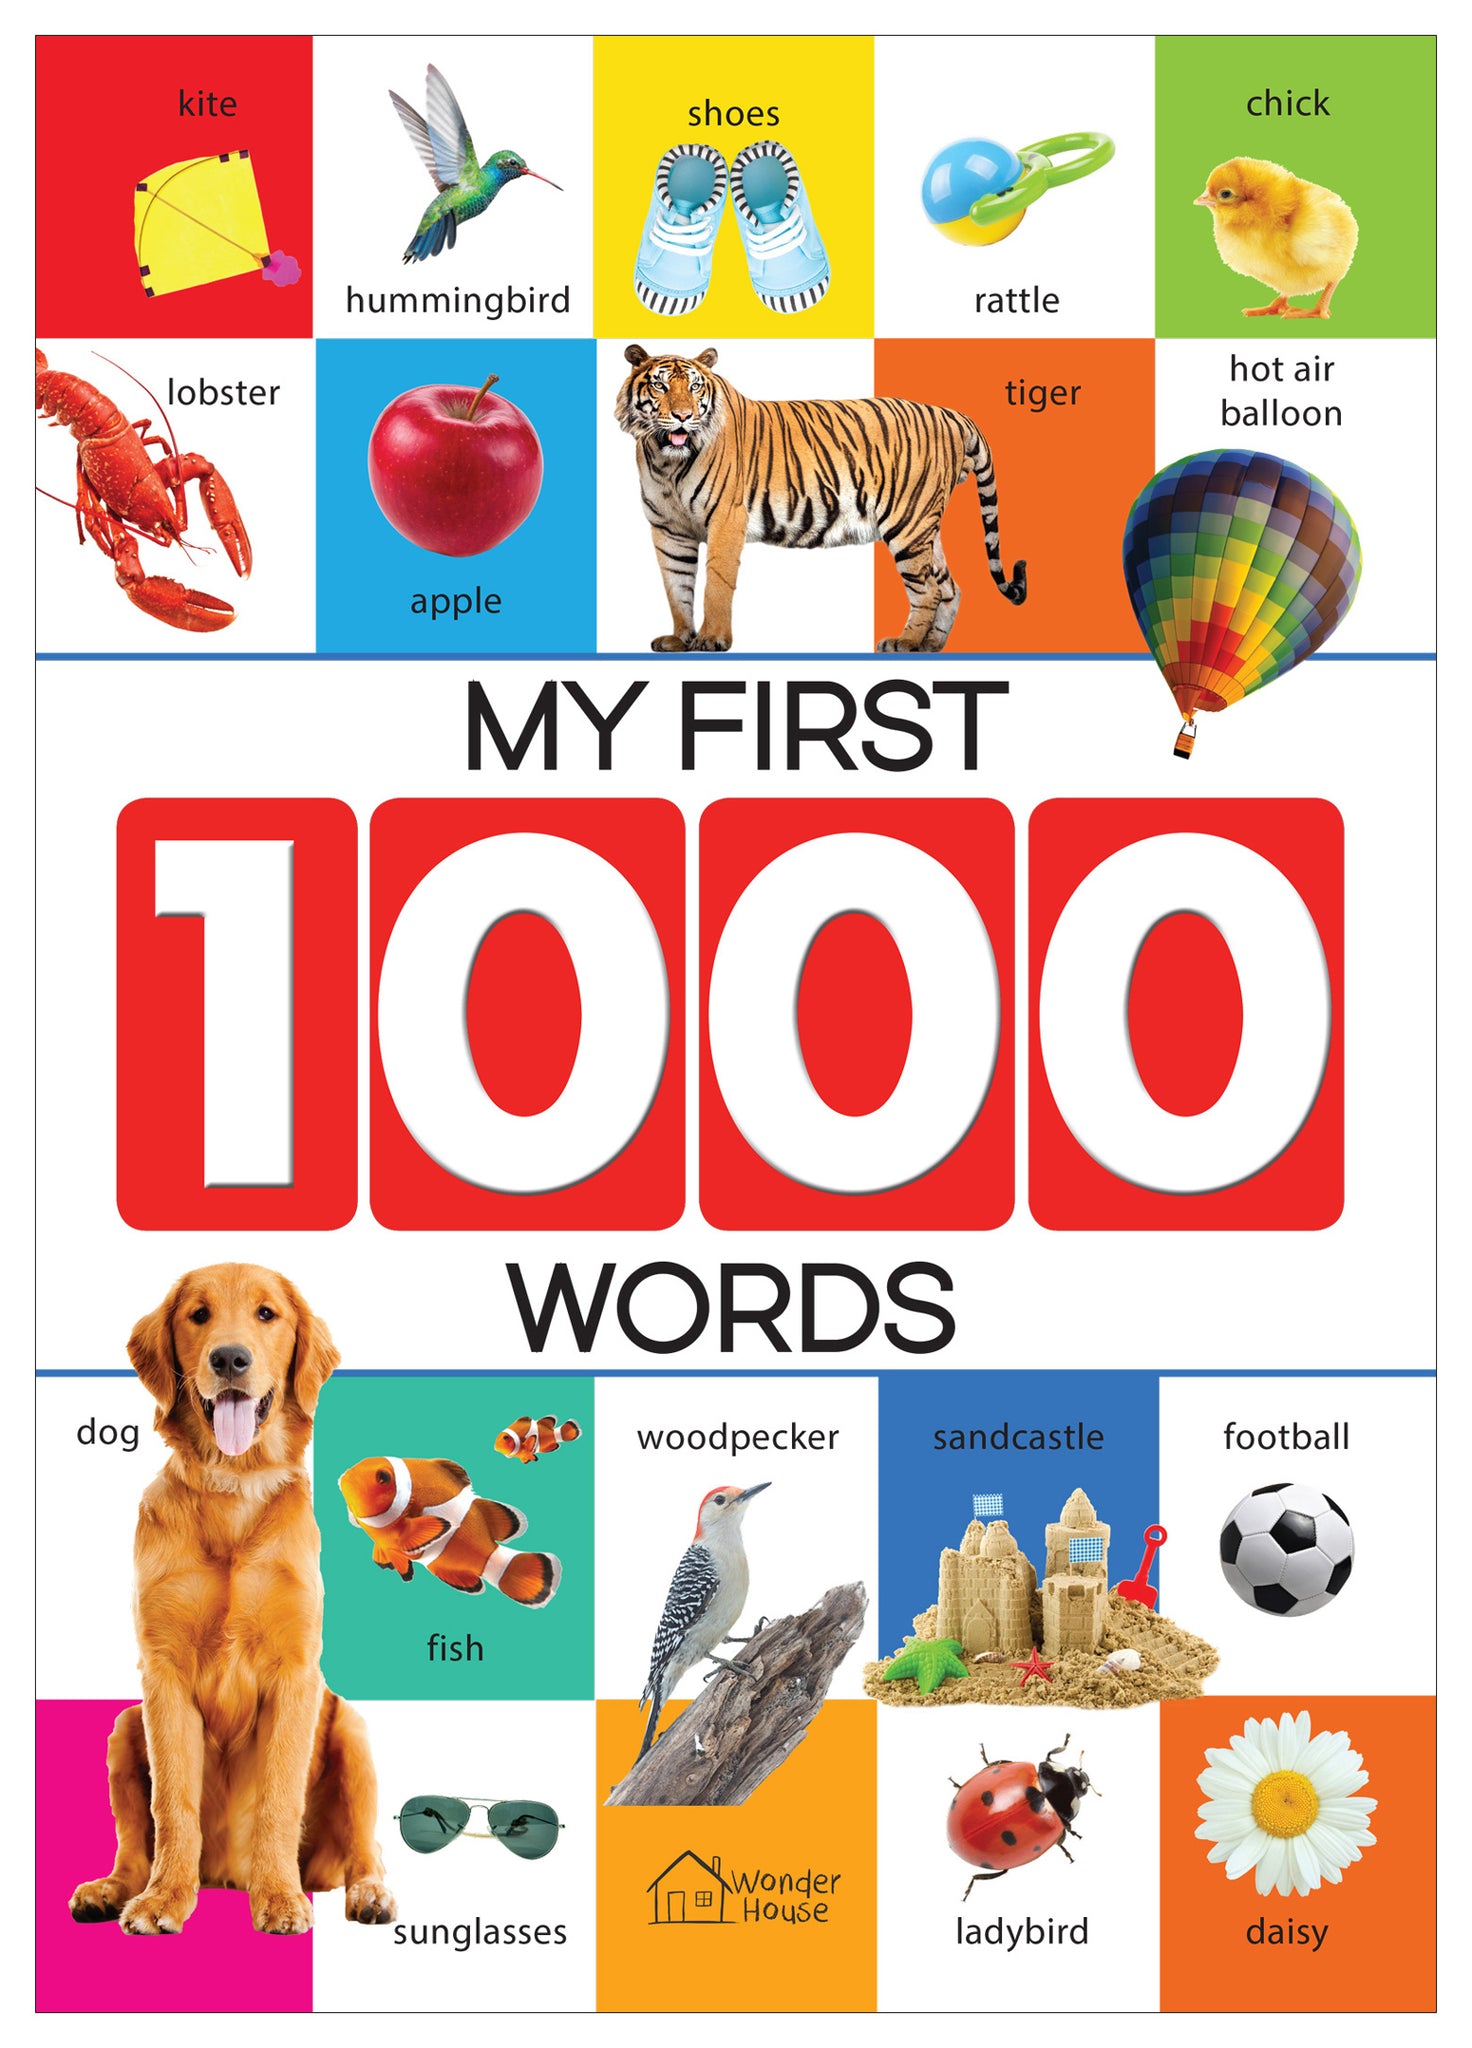 My First 1000 Words: Early Learning Picture Book to learn Alphabet, Numbers, Shapes and Colours, Transport, Birds and Animals, Professions, Opposite Words, Action Words, Parts of the body and Objects Around Us.